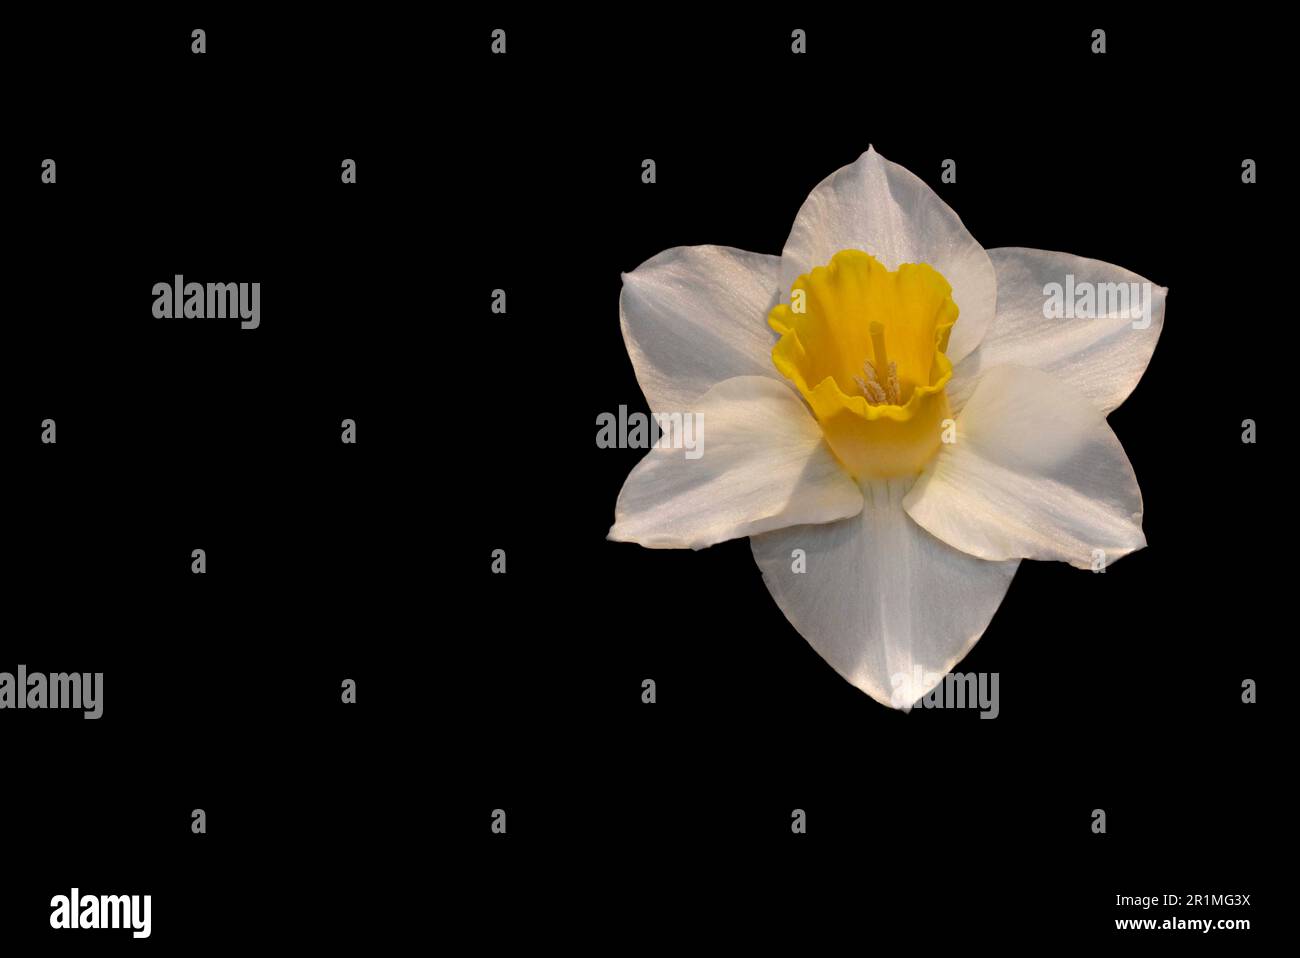 The bright whites and yellows of the daffodil contrast with the inky black backdrop. Stock Photo